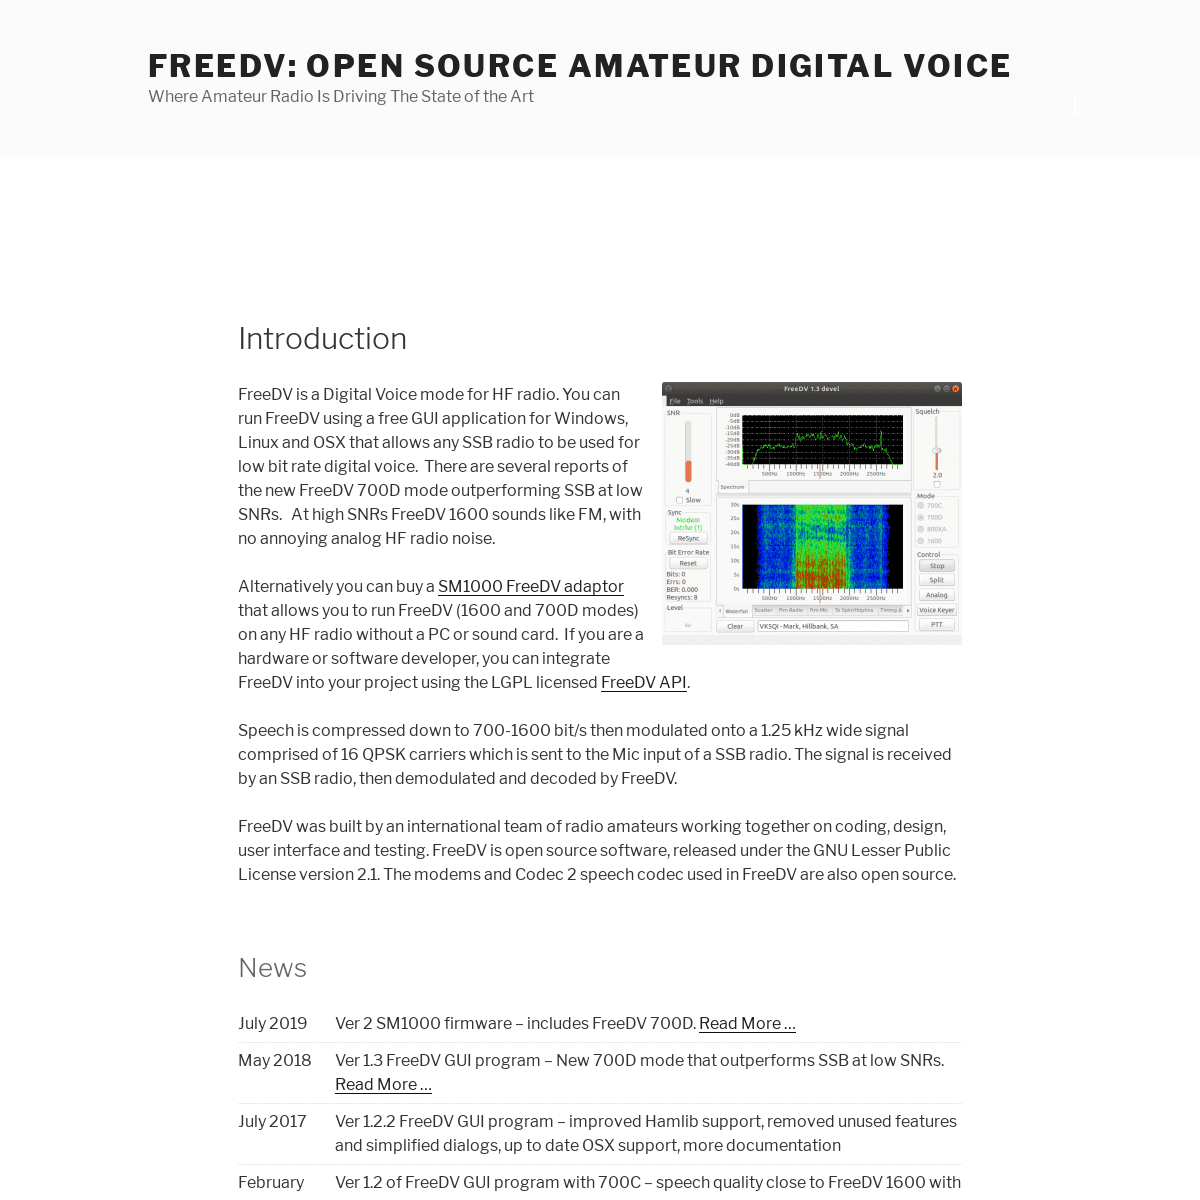 A complete backup of freedv.org